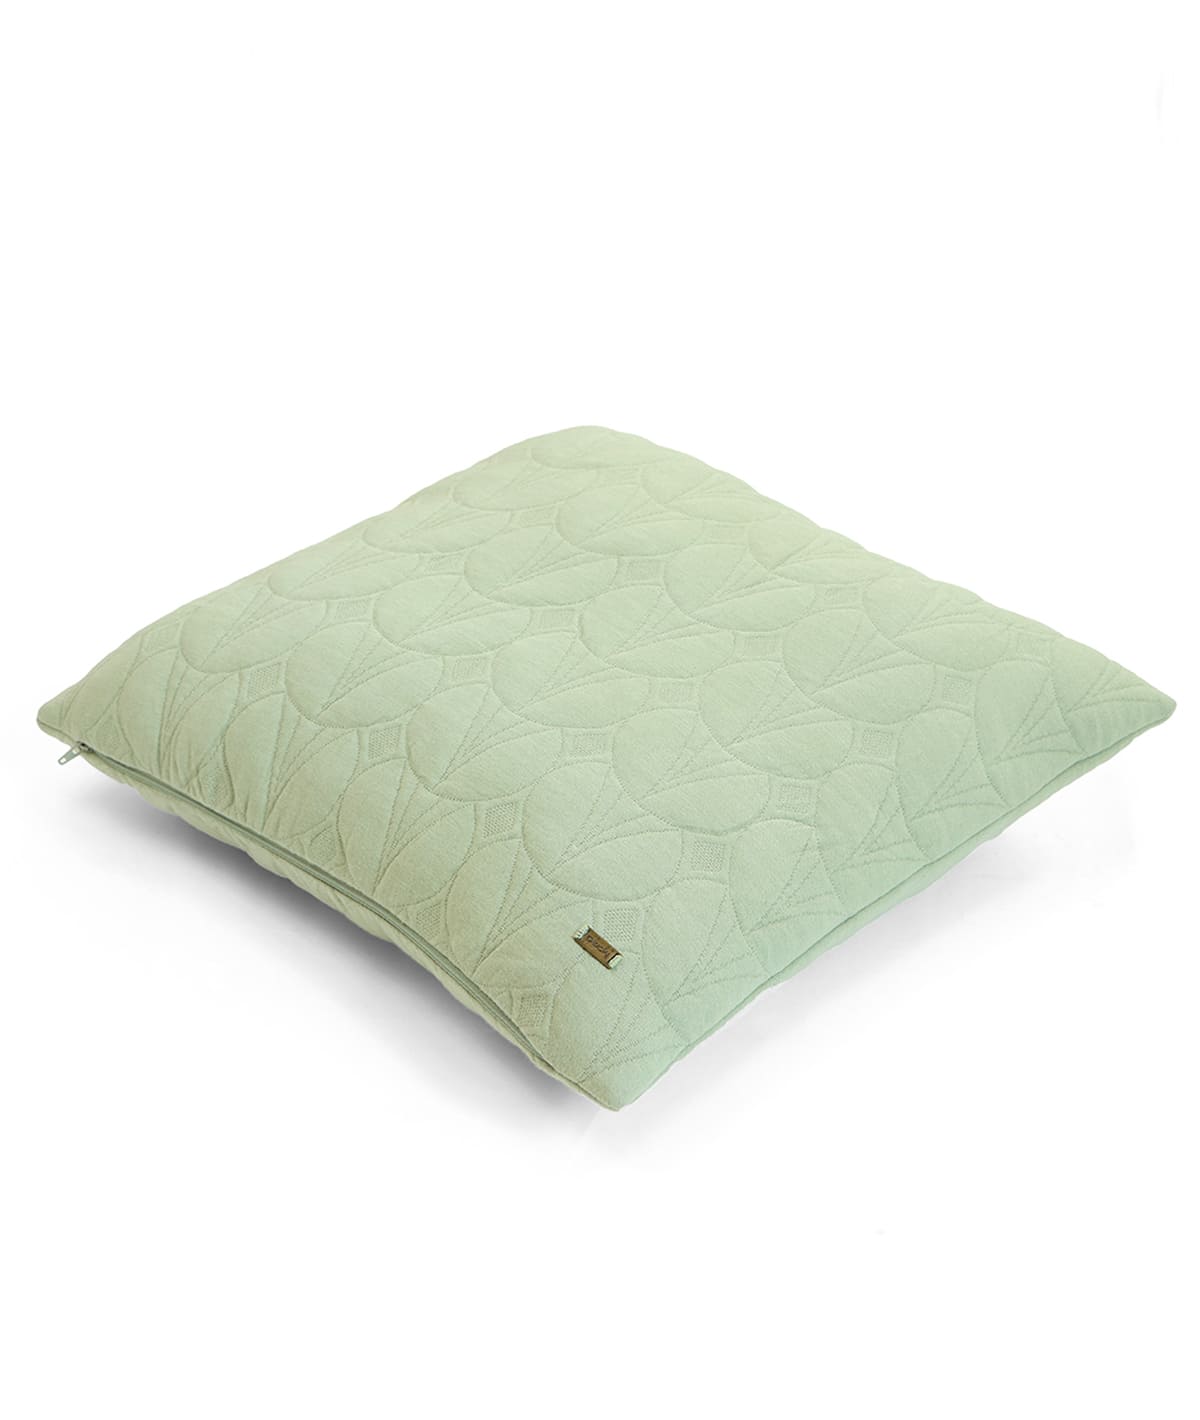 Illusion Pistachio Green Cotton Knitted Quilted Decorative 18 X 18 Inches Cushion Cover